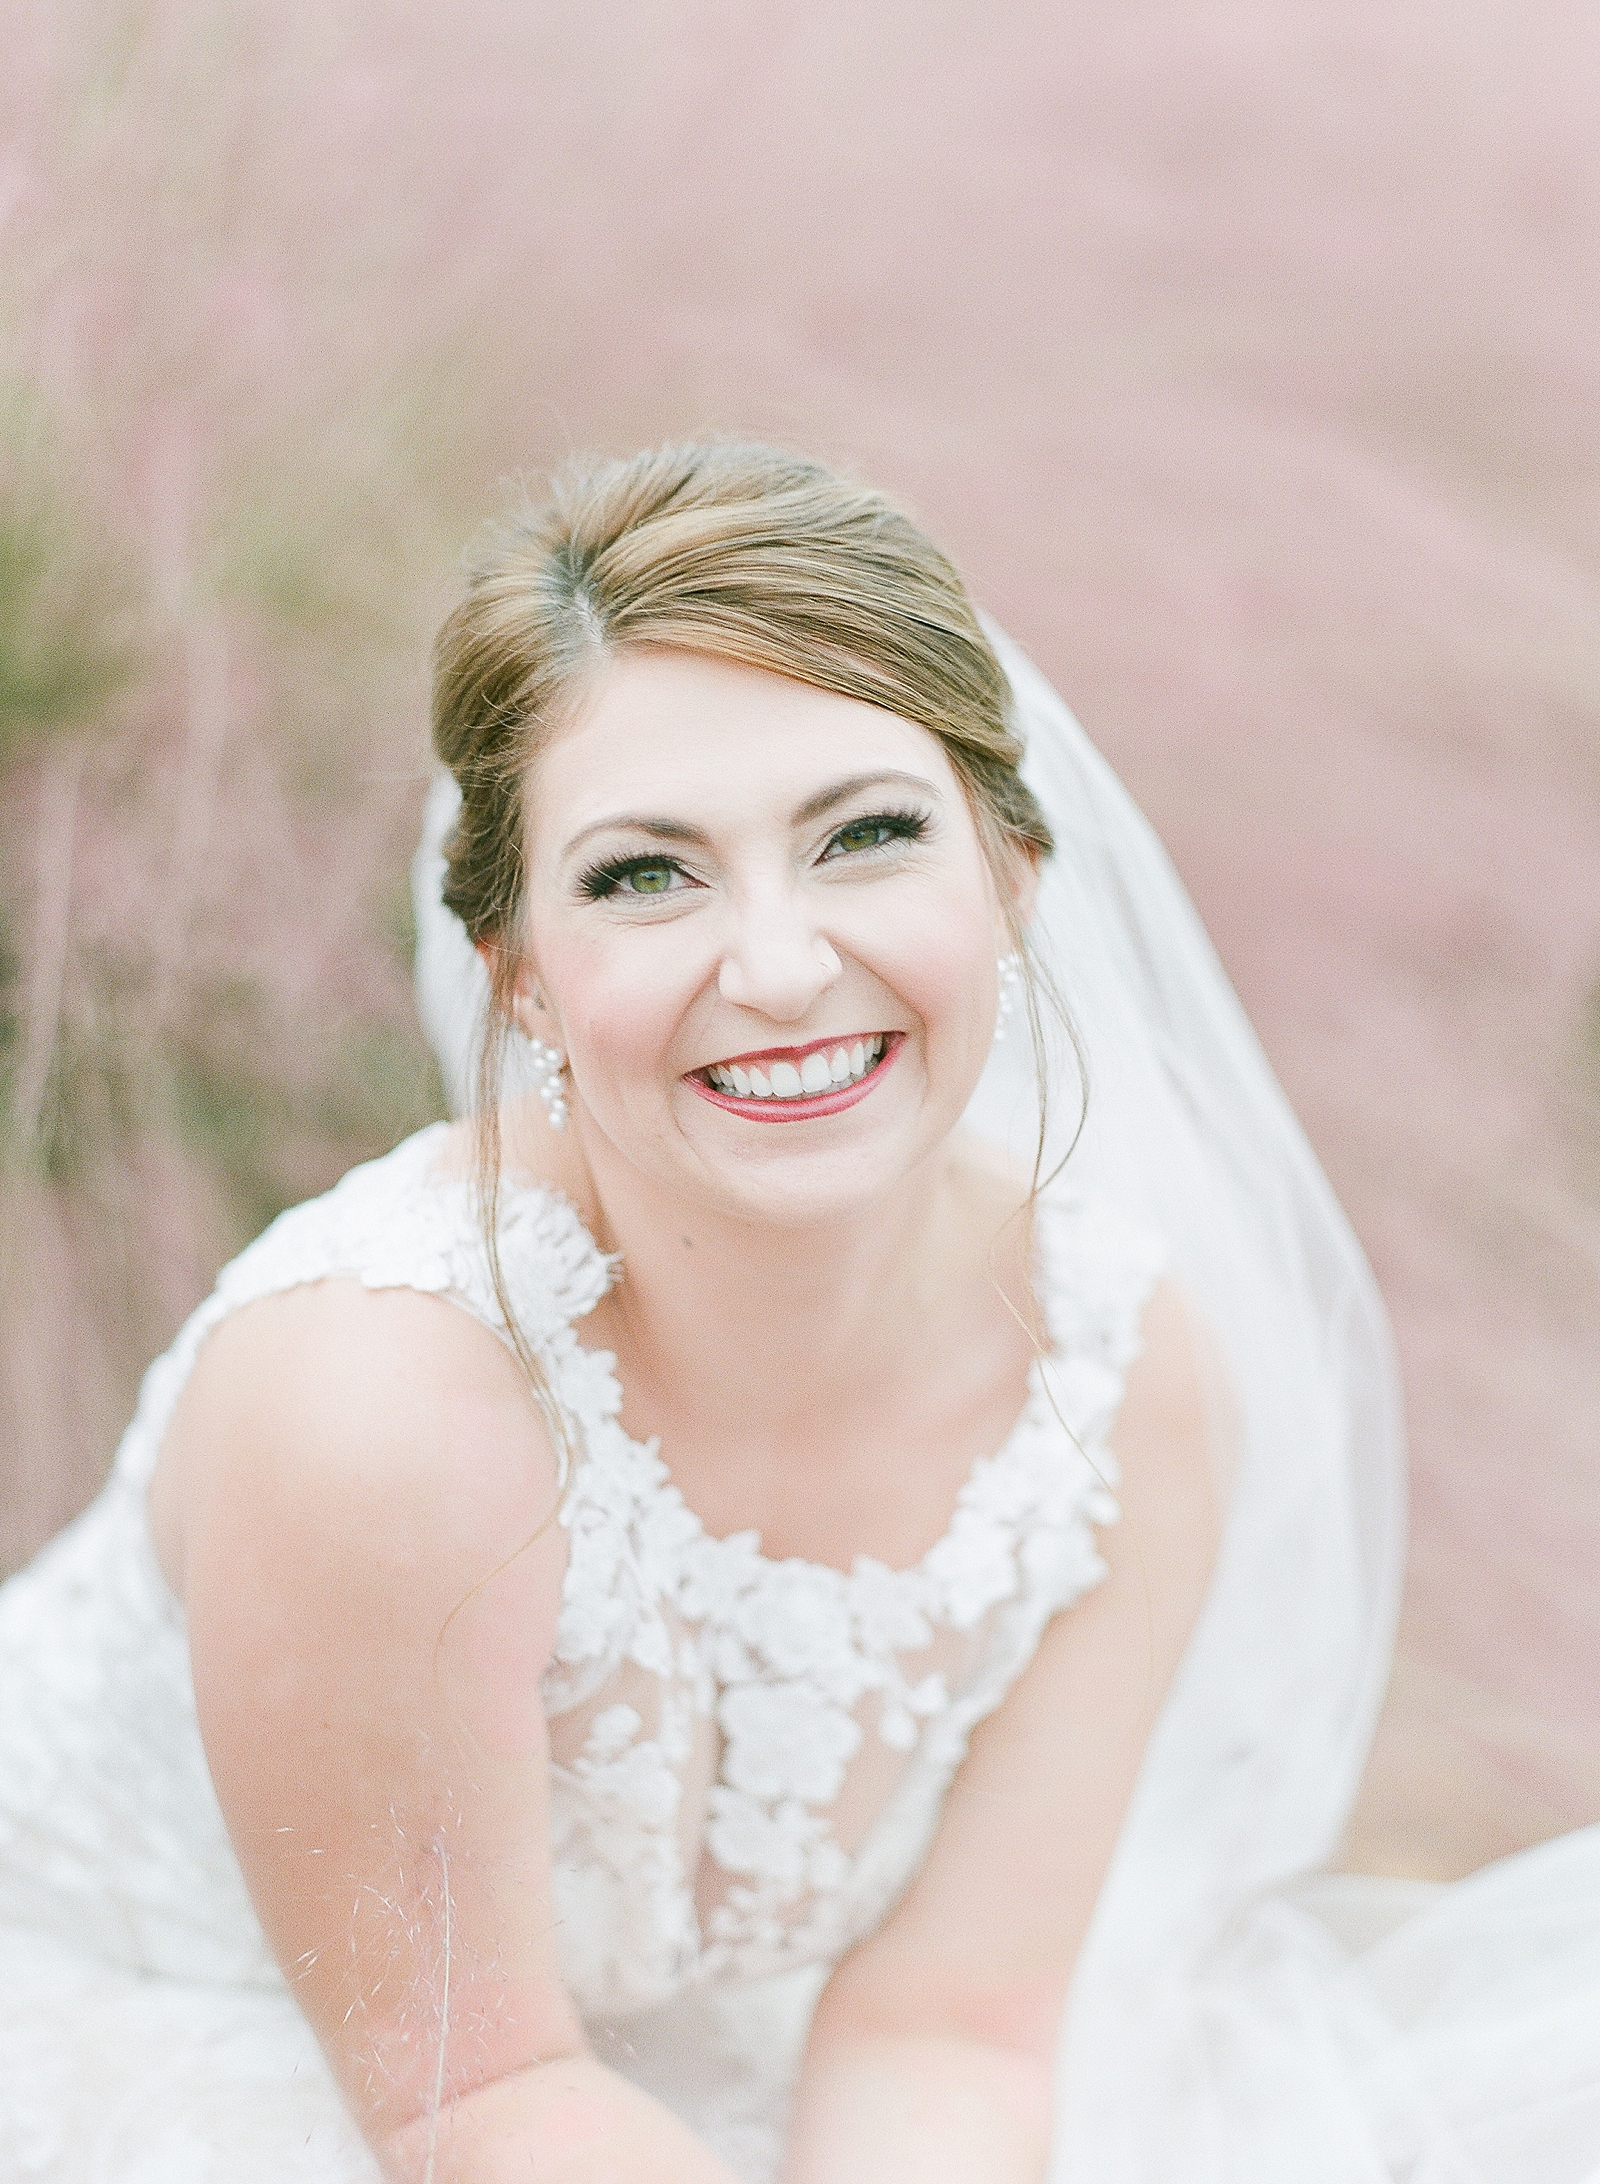 Asheville Bridal Editorial Bride Smiling at Camera surrounded by Mauve Flowers Photo